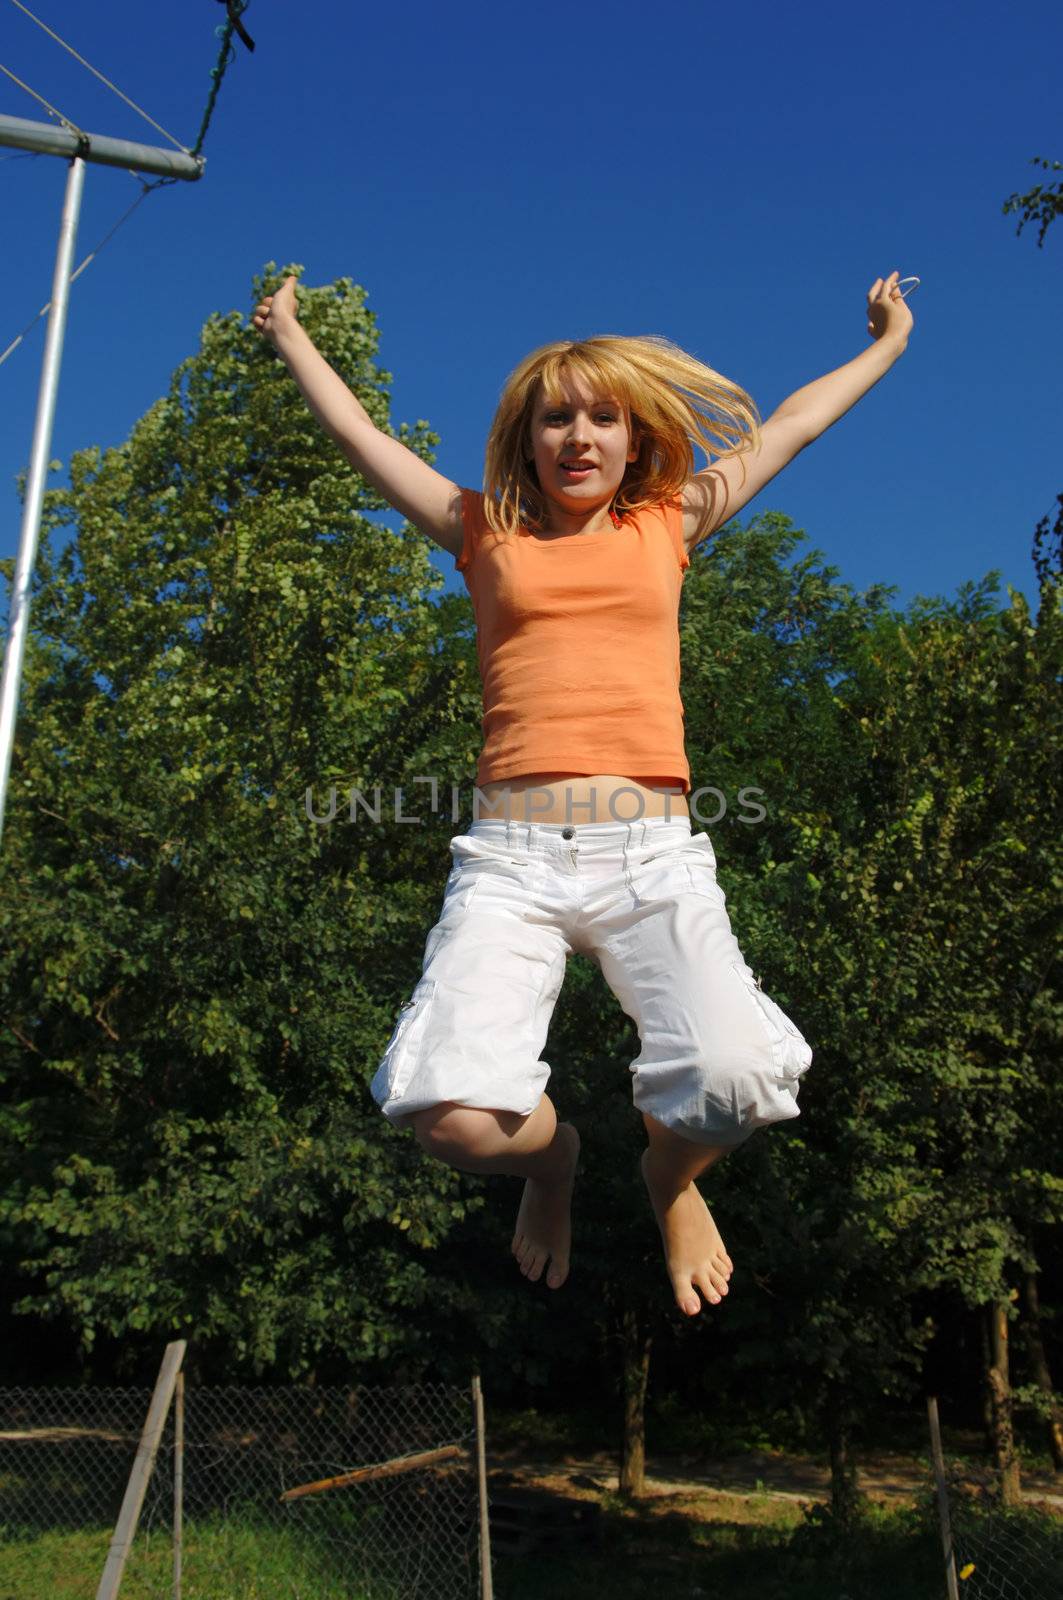 Girl Jumping on Trampoline by adamr